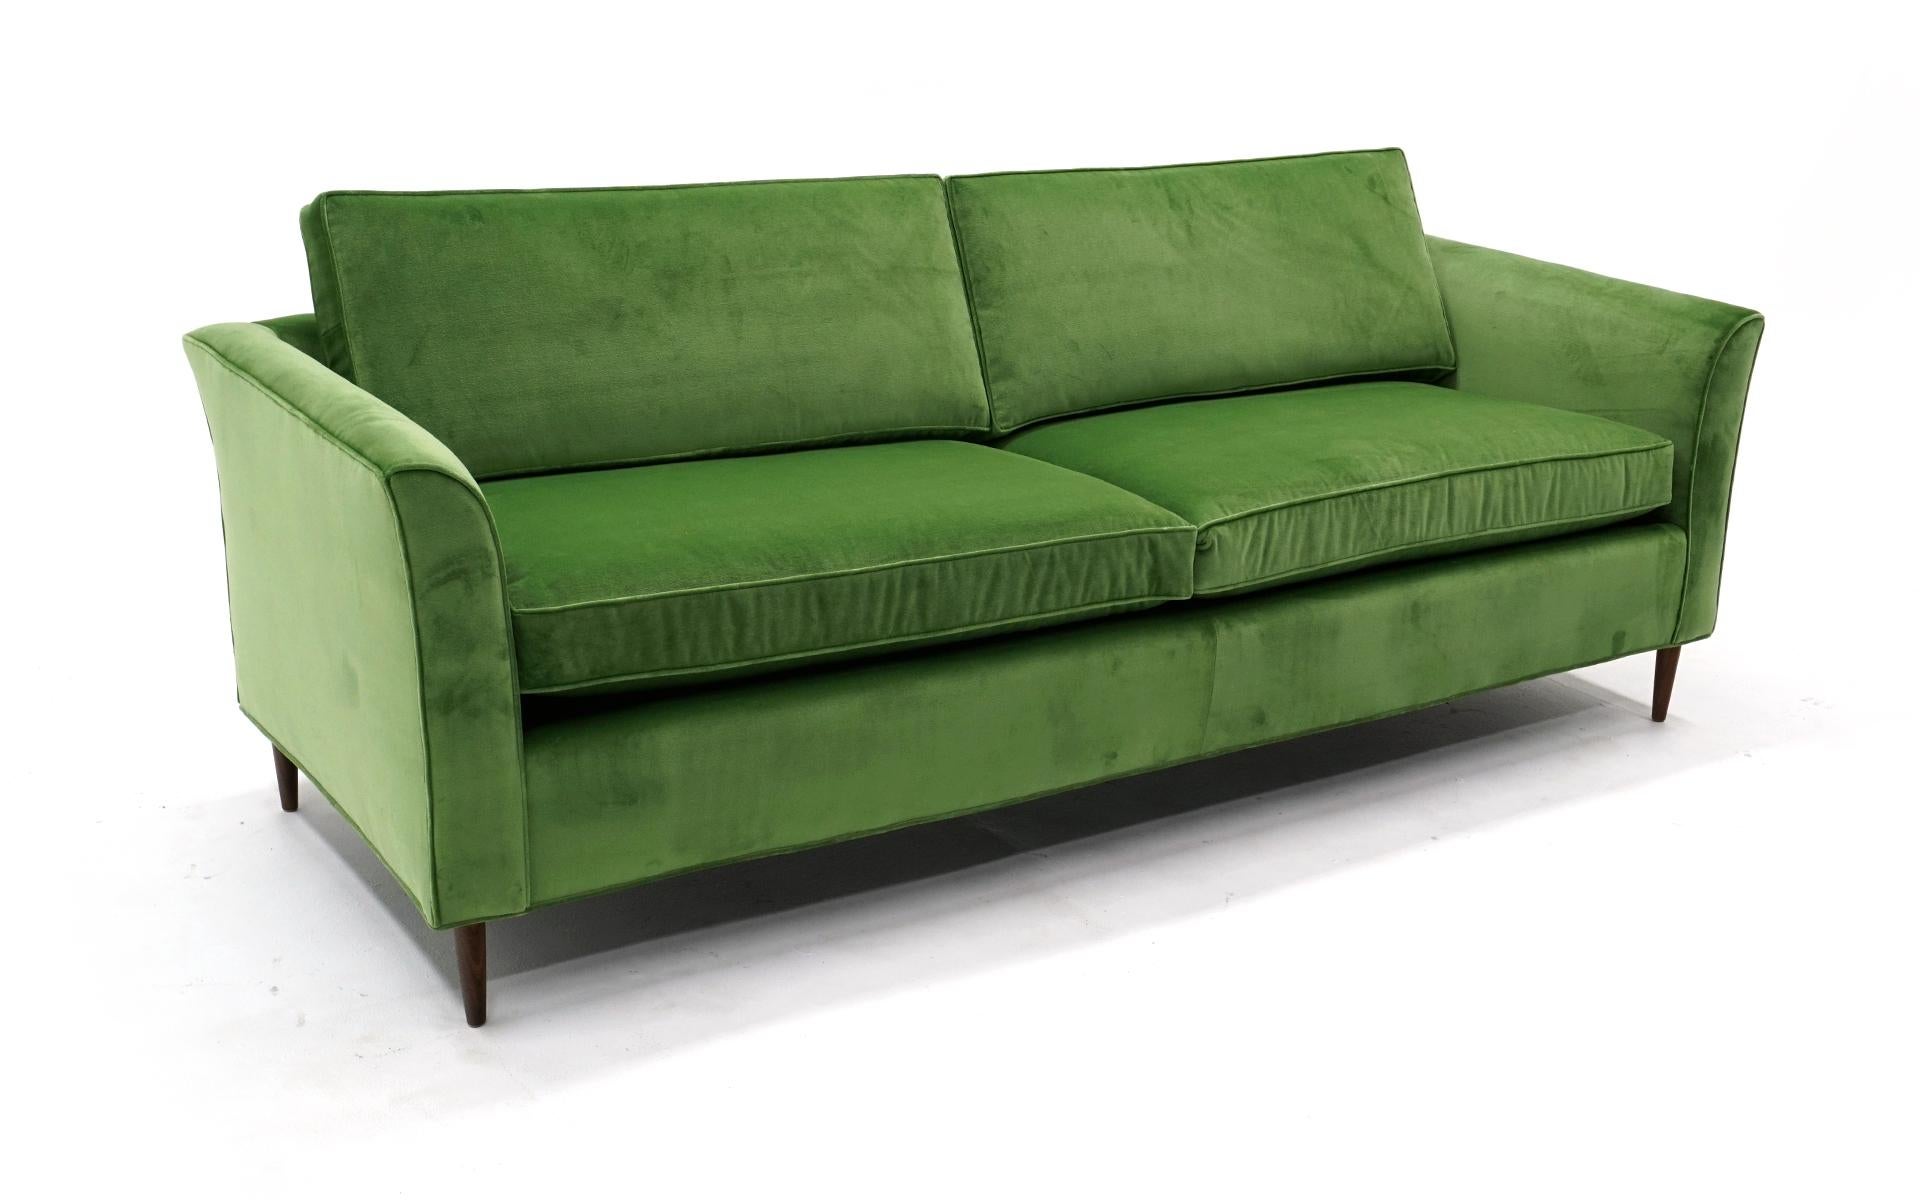 1960s three seat sofa expertly restored and reupholstered in lime green velvet. No wear at all. Comfortable and ready to use.